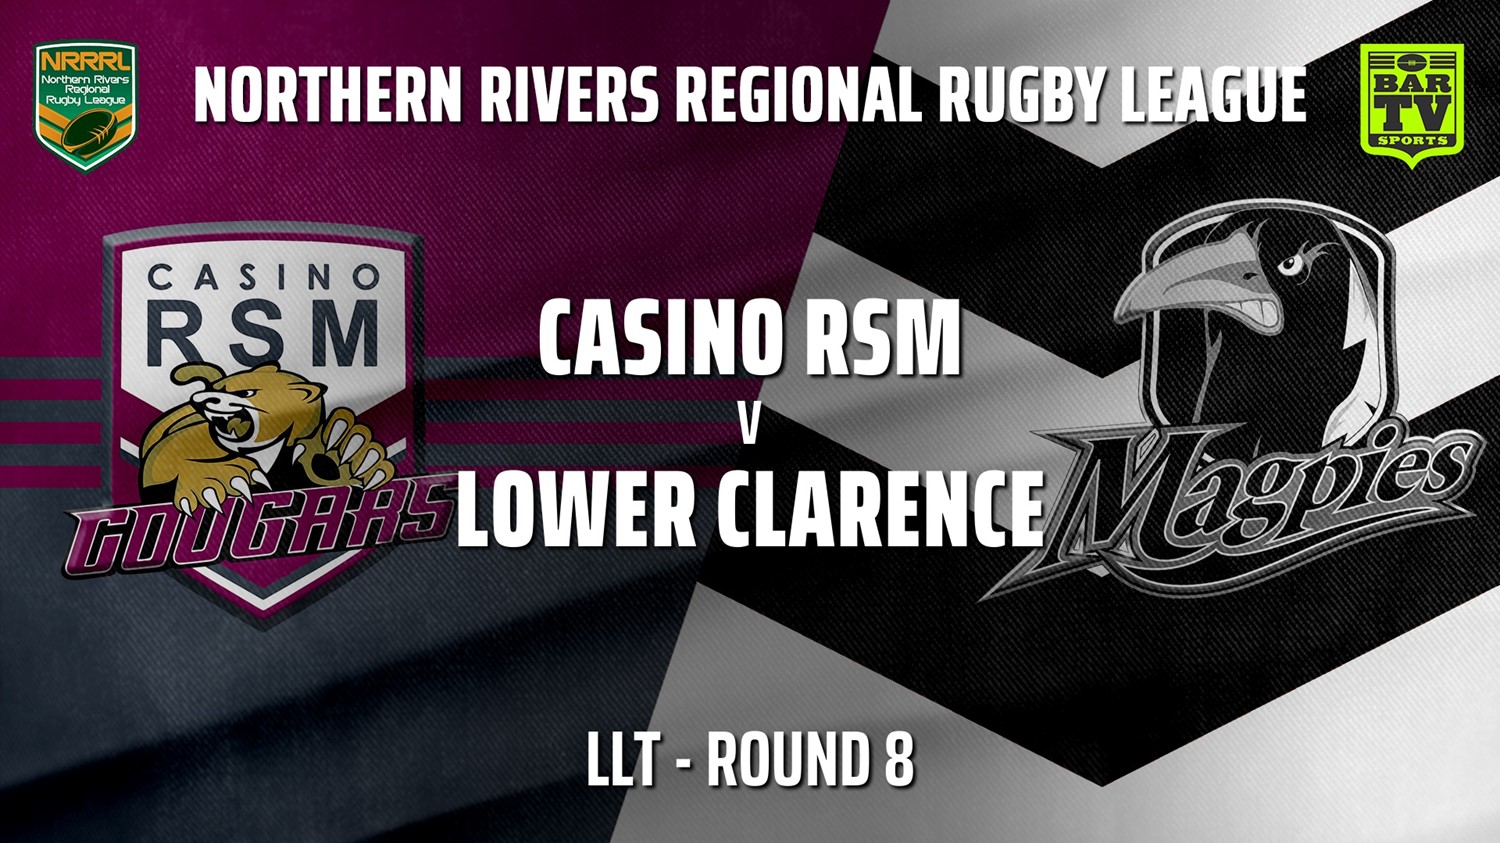 210704-Northern Rivers Round 8 - LLT - Casino RSM Cougars v Lower Clarence Magpies Slate Image